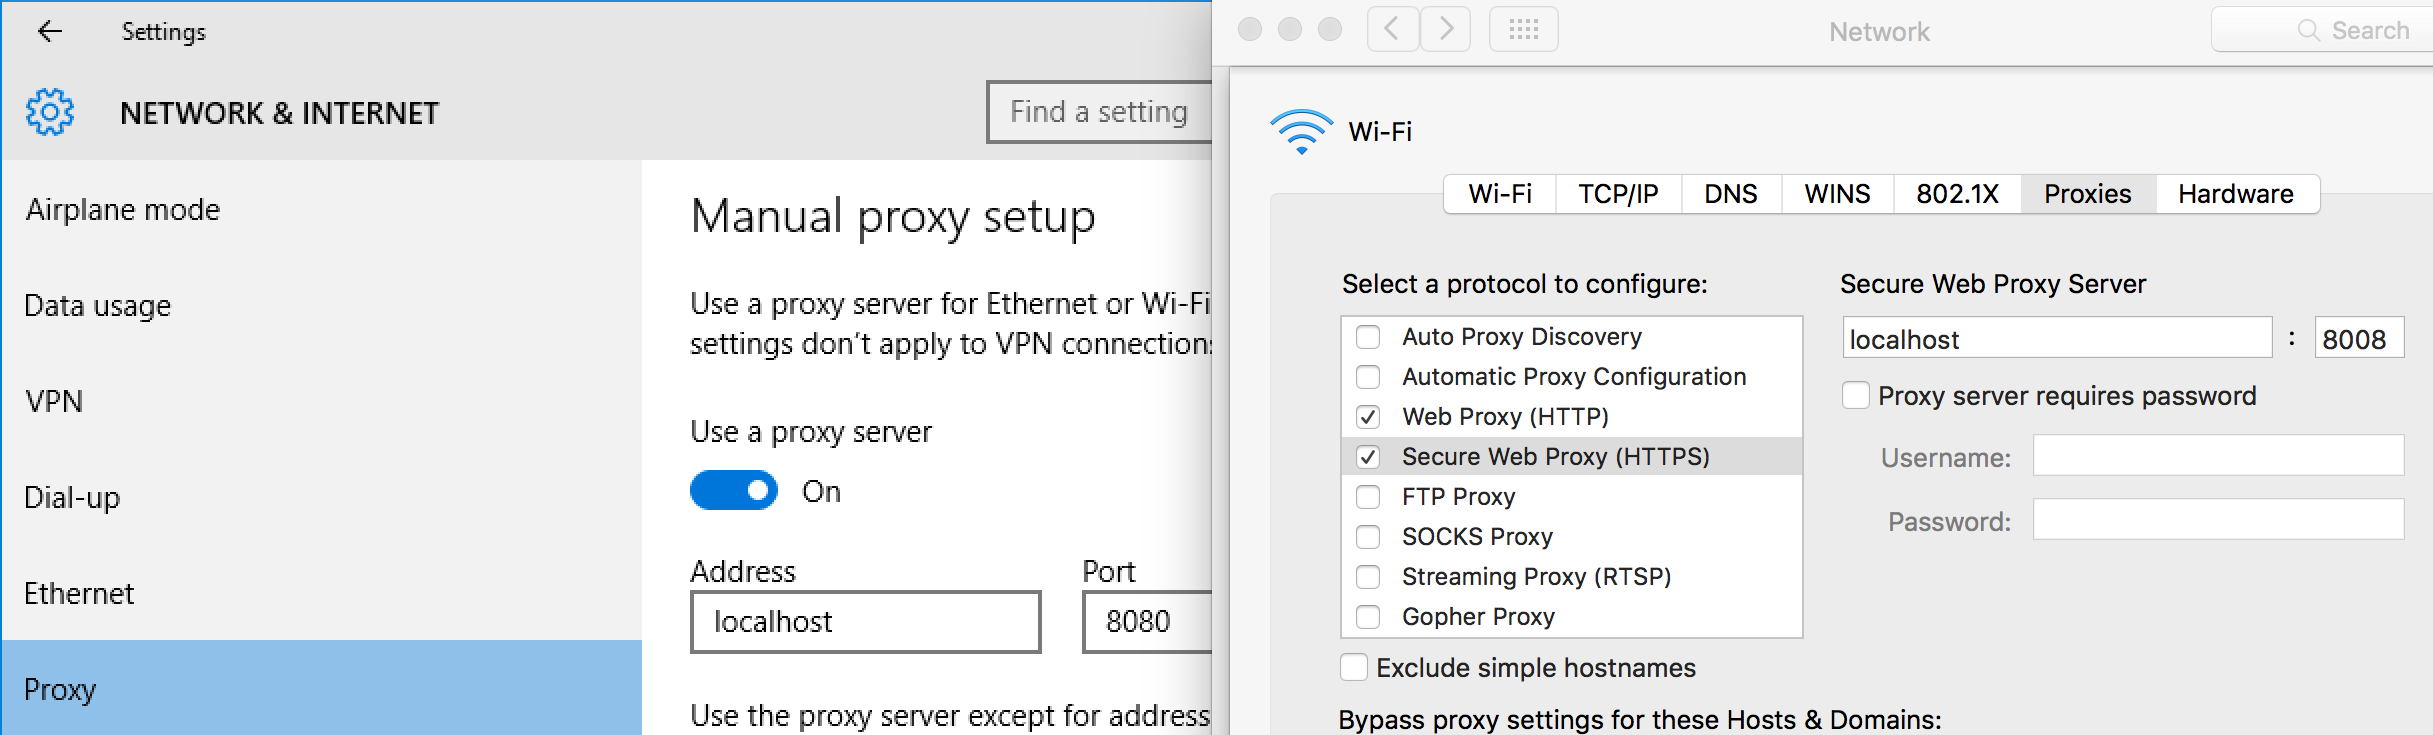 Setting up proxy on Windows 10 and OS X